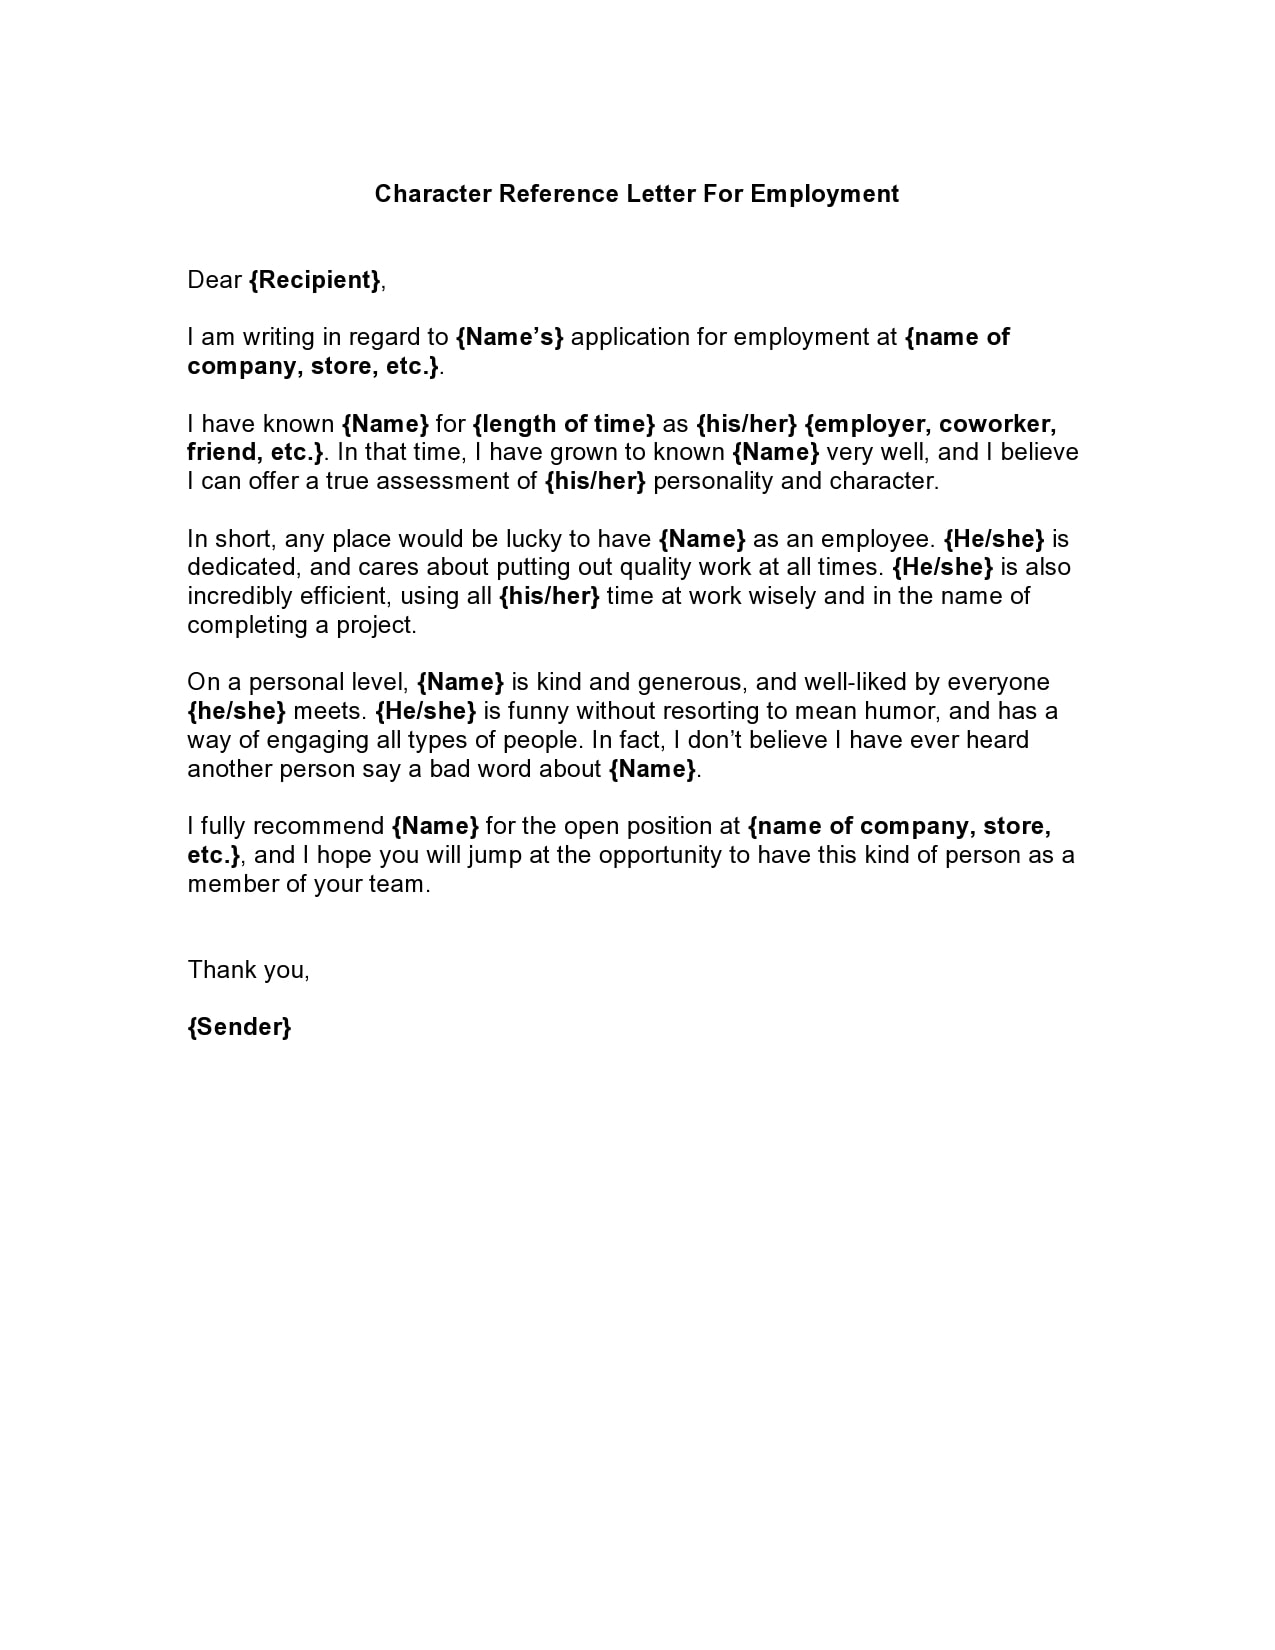 Letter Of Personal Reference Samples from templatearchive.com